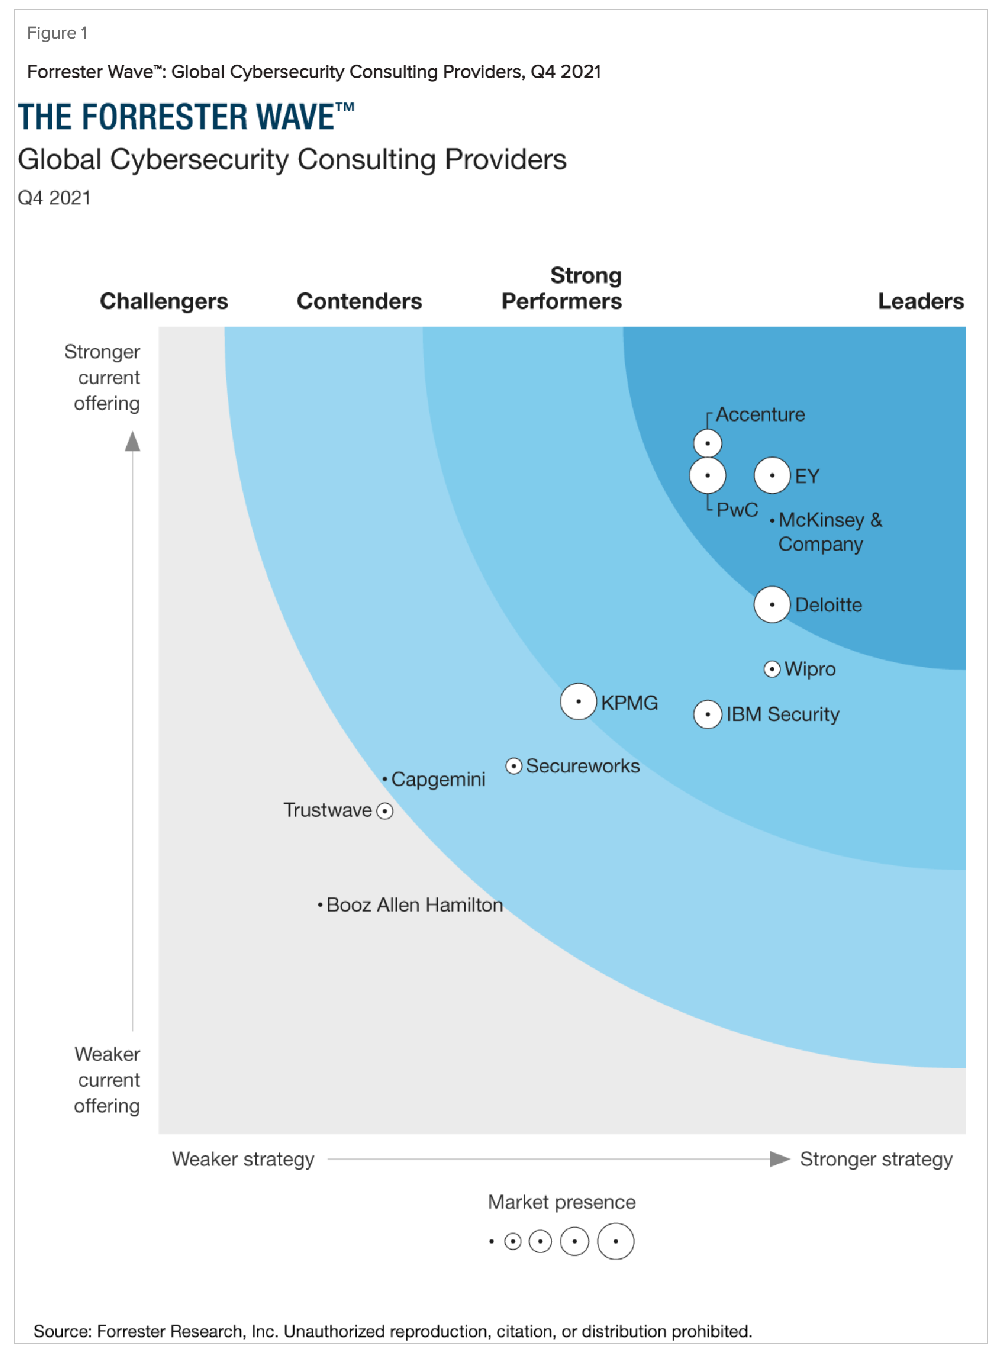 Wipro recognized as a Strong Performer in The Forrester Wave